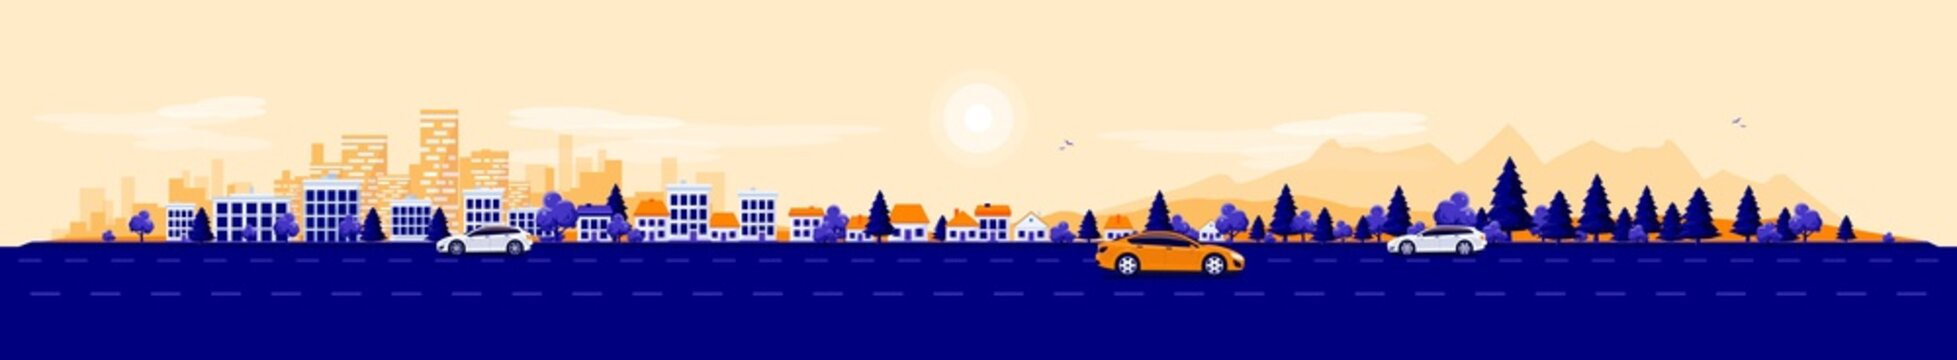 Empty road traffic in urban landscape street with cars, city skyline office buildings, family houses in town and mountain with trees in background. Orange blue flat vector cartoon style illustration.